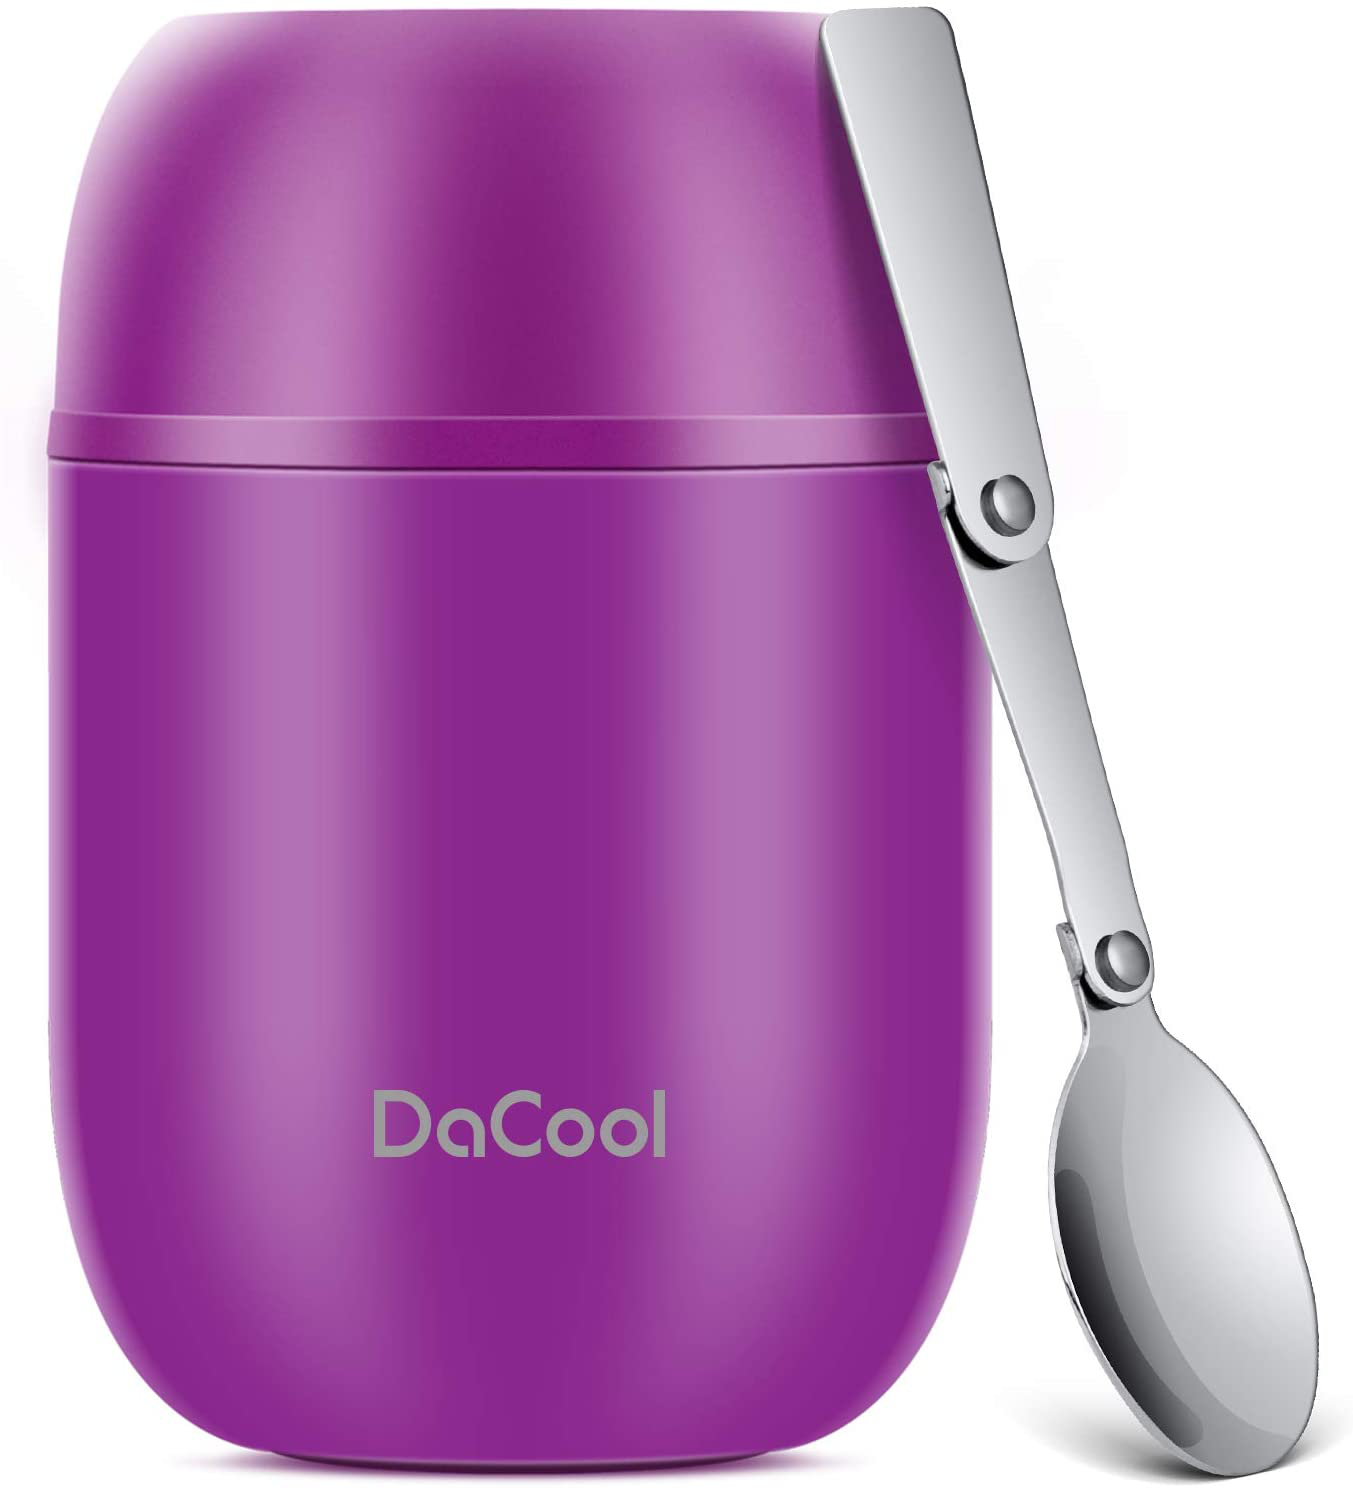 Hot Food Jar DaCool Insulated Lunch Container 16 oz Stainless Steel Keep Food Cool & Hot Bento Lunch Box for Kids Adult with Spoon Leak Proof for School Office Picnic Travel Outdoors - Purple